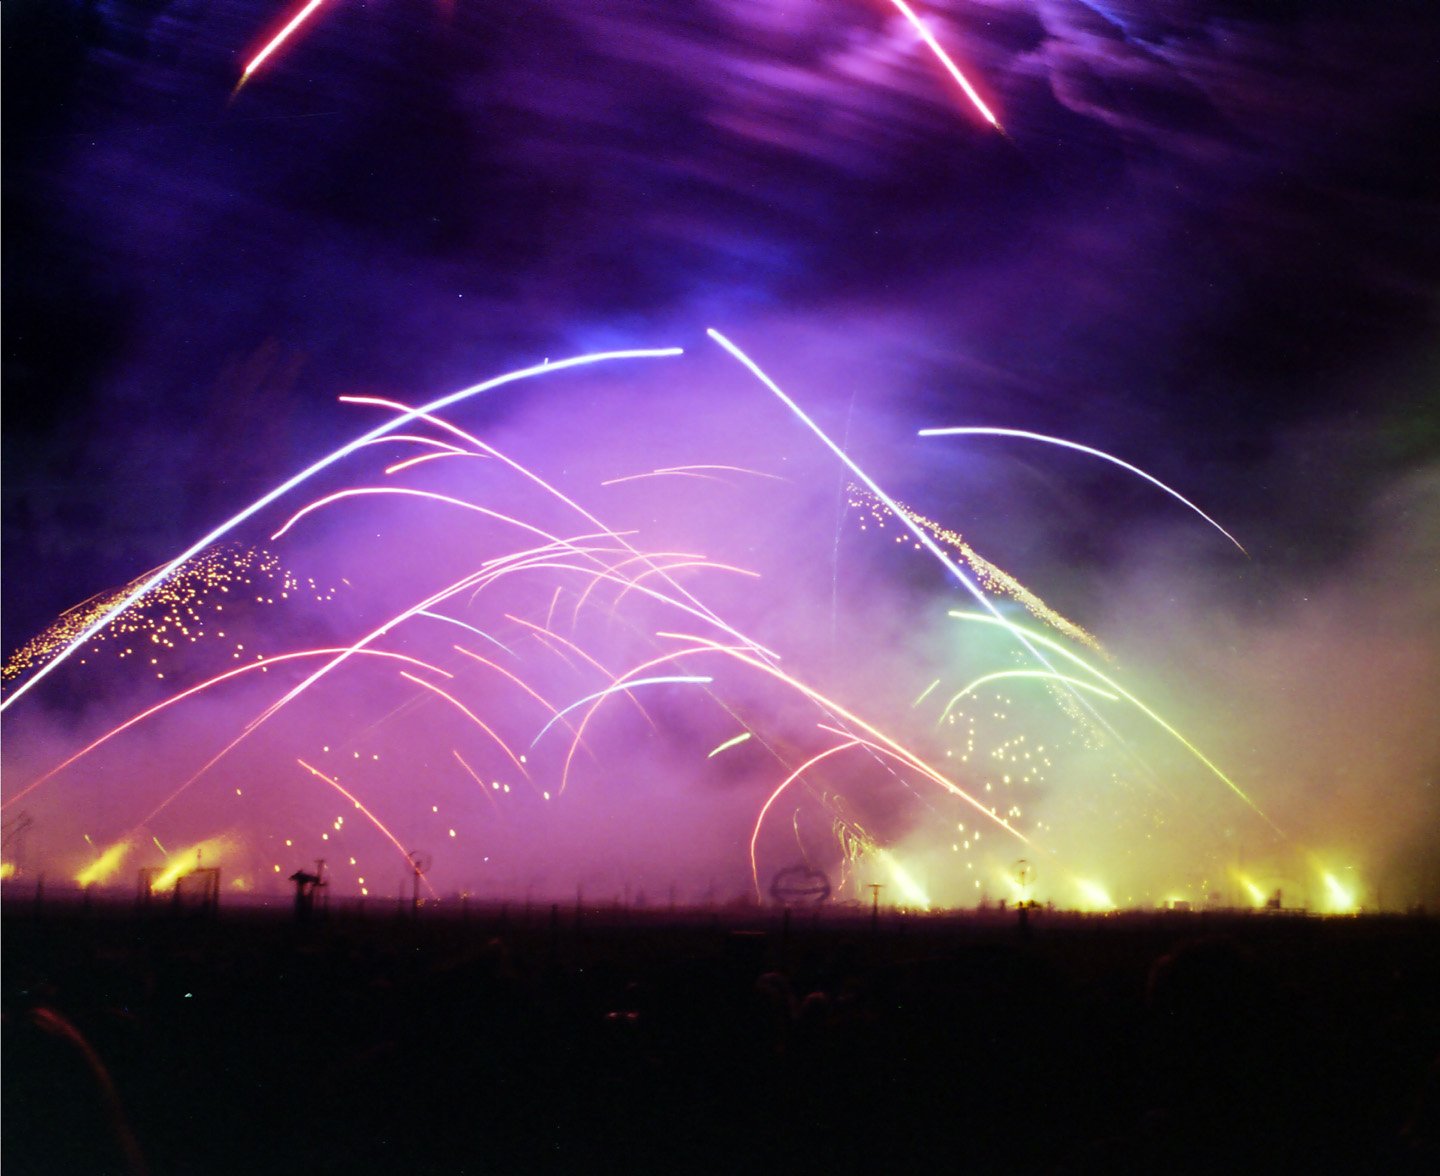 large fireworks exploding off into the sky at night